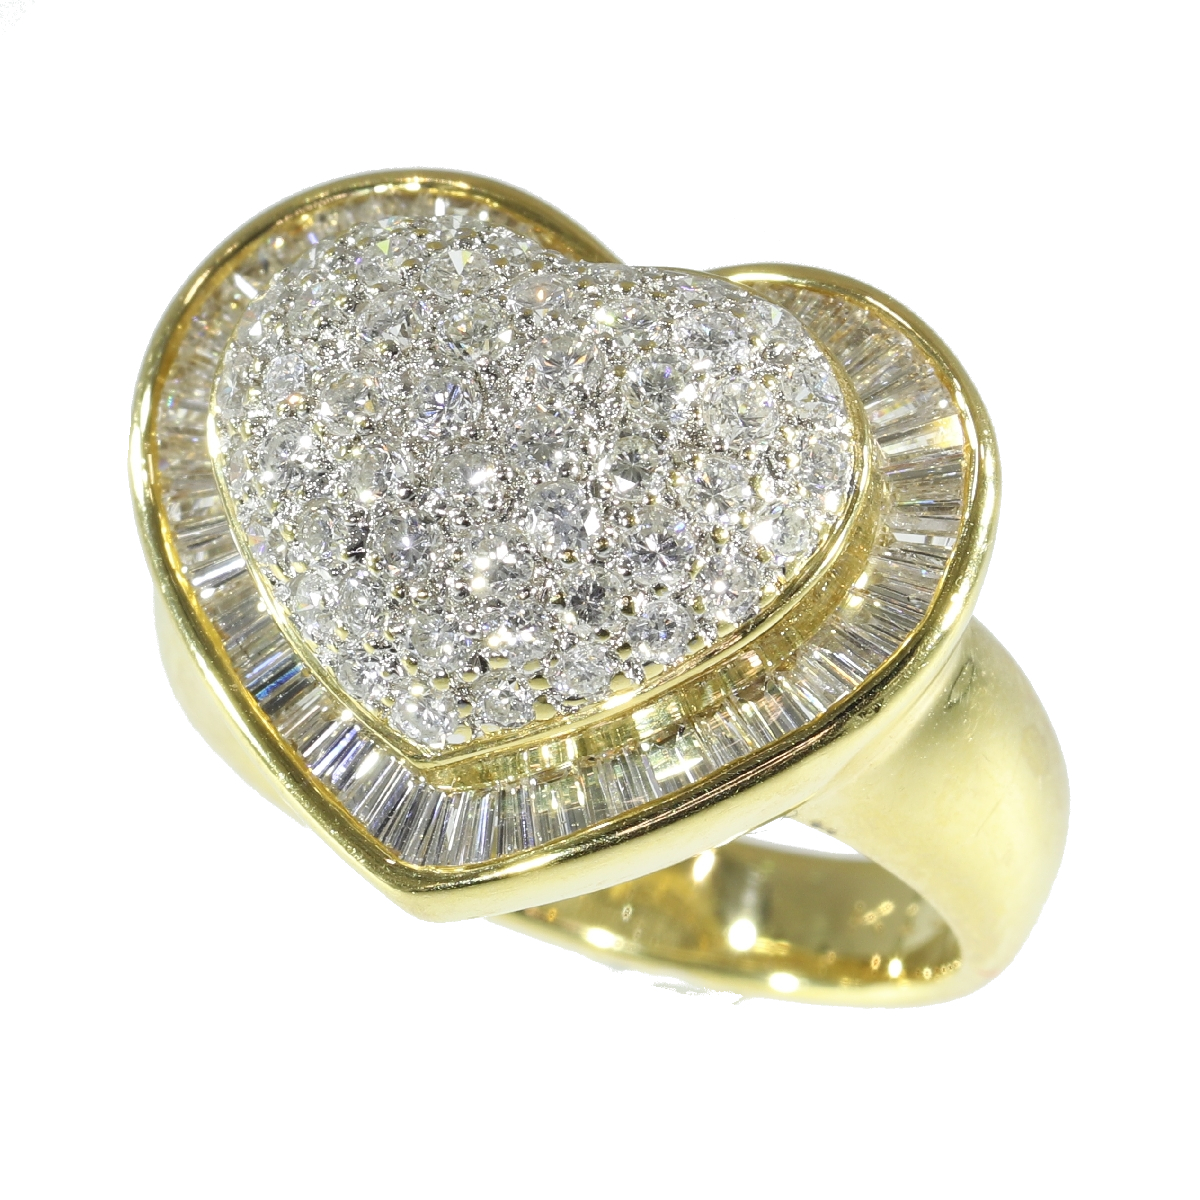 Vintage diamond ring heart shaped loaded with 3 crt of diamonds ...